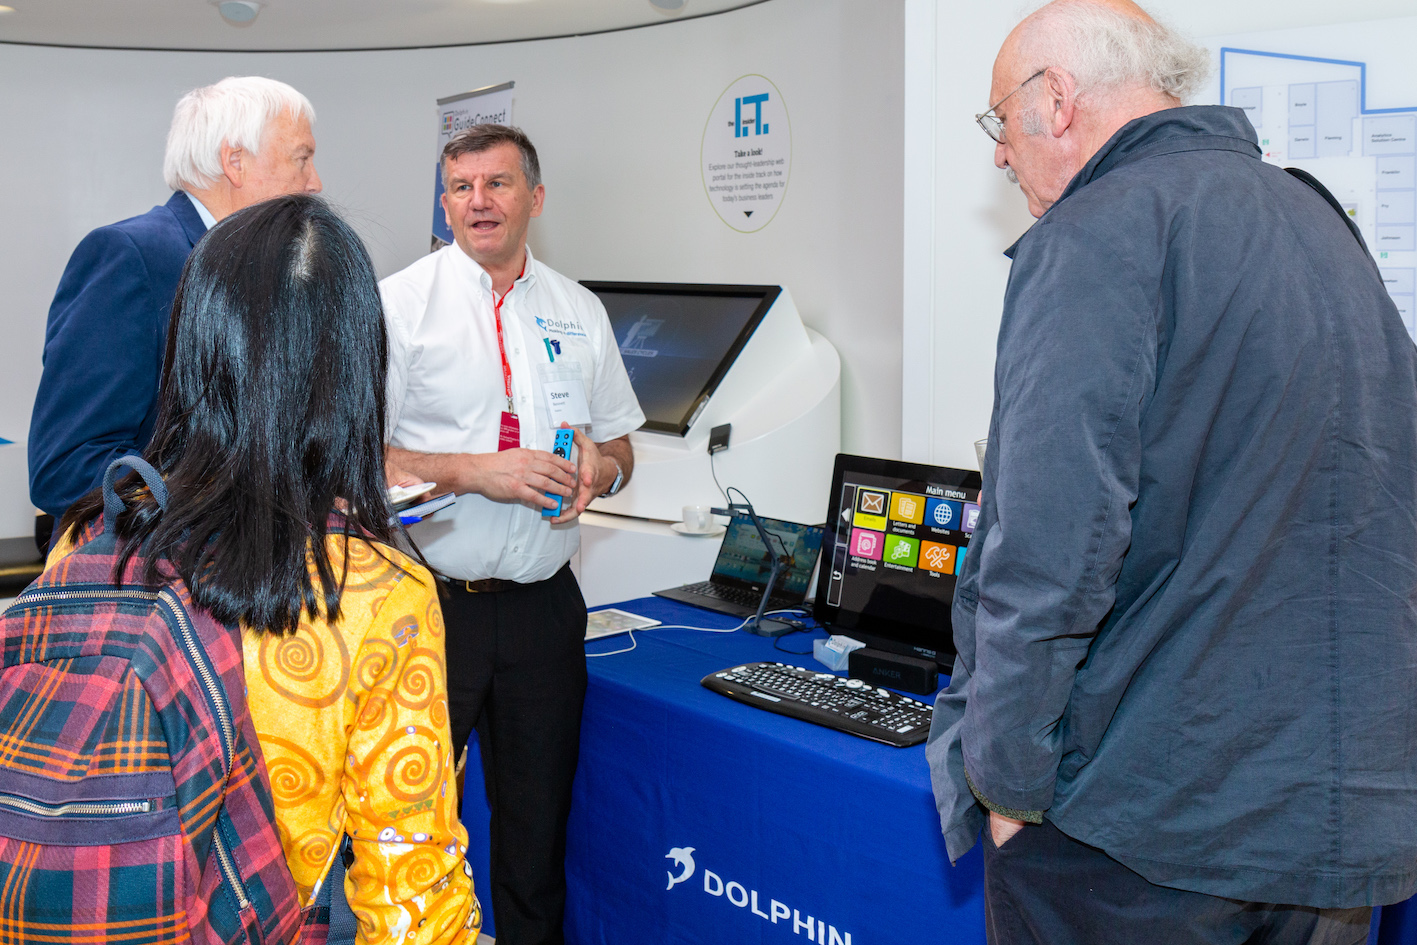 A representative from Dophin demonstrating their assistive tech to event attendees